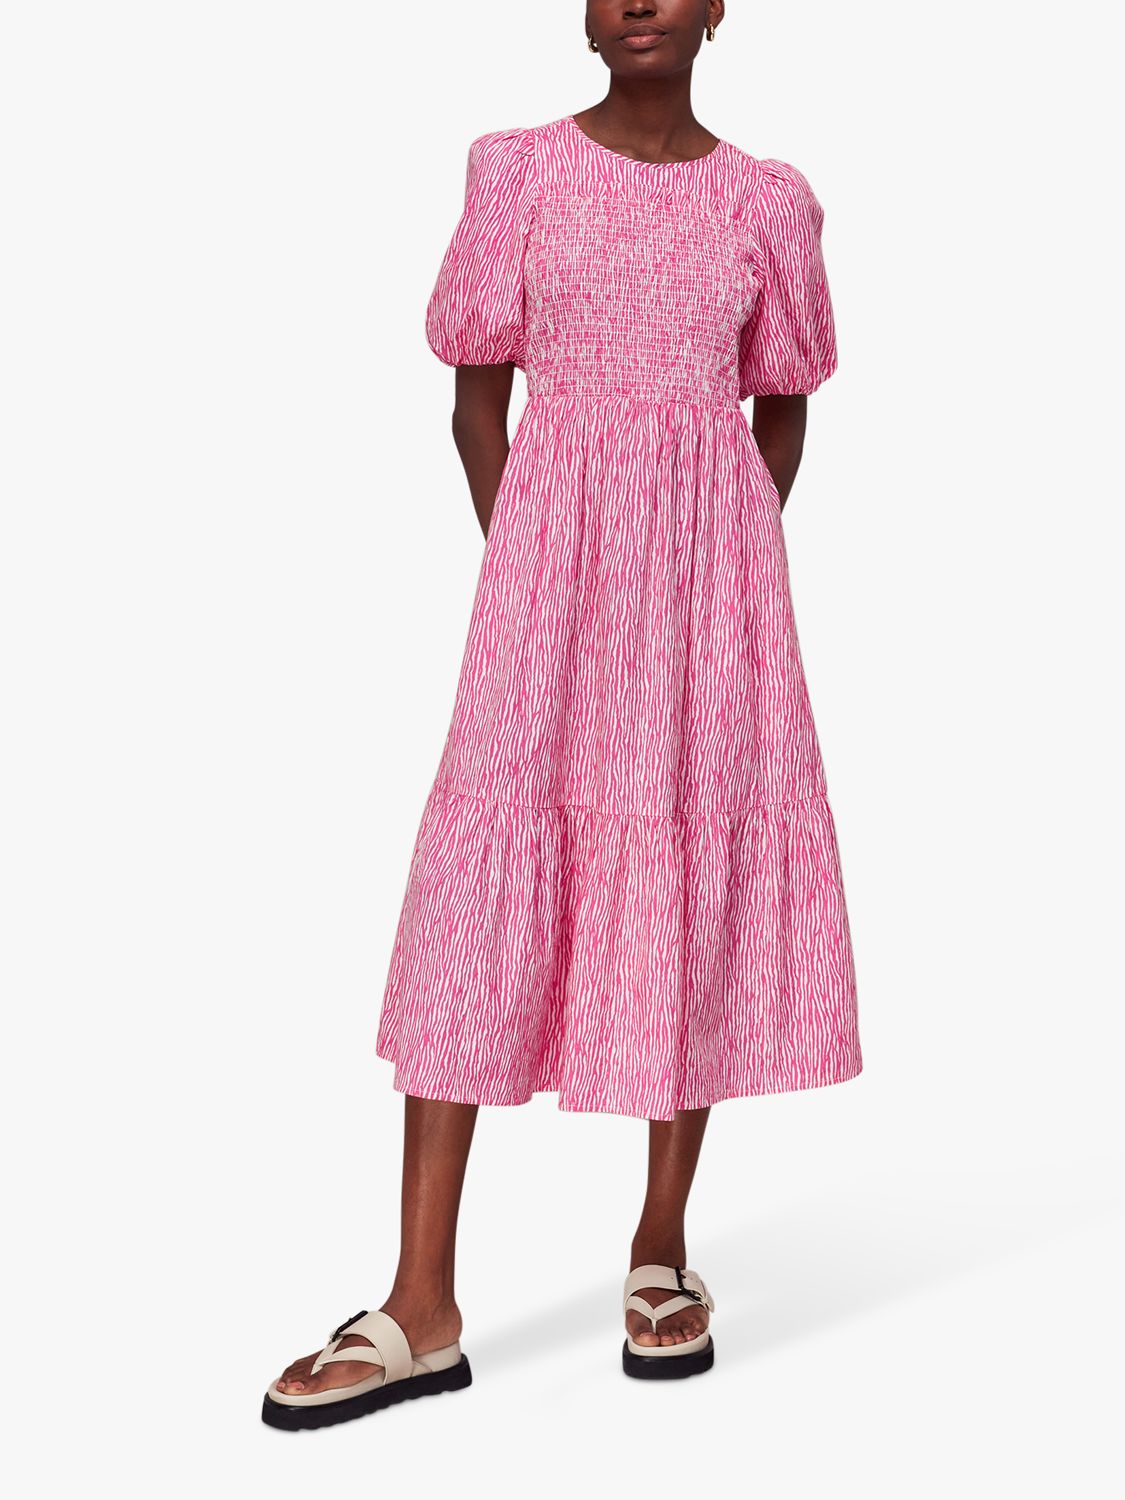 Whistles Uneven Lines Midi Dress, Pink at John Lewis & Partners